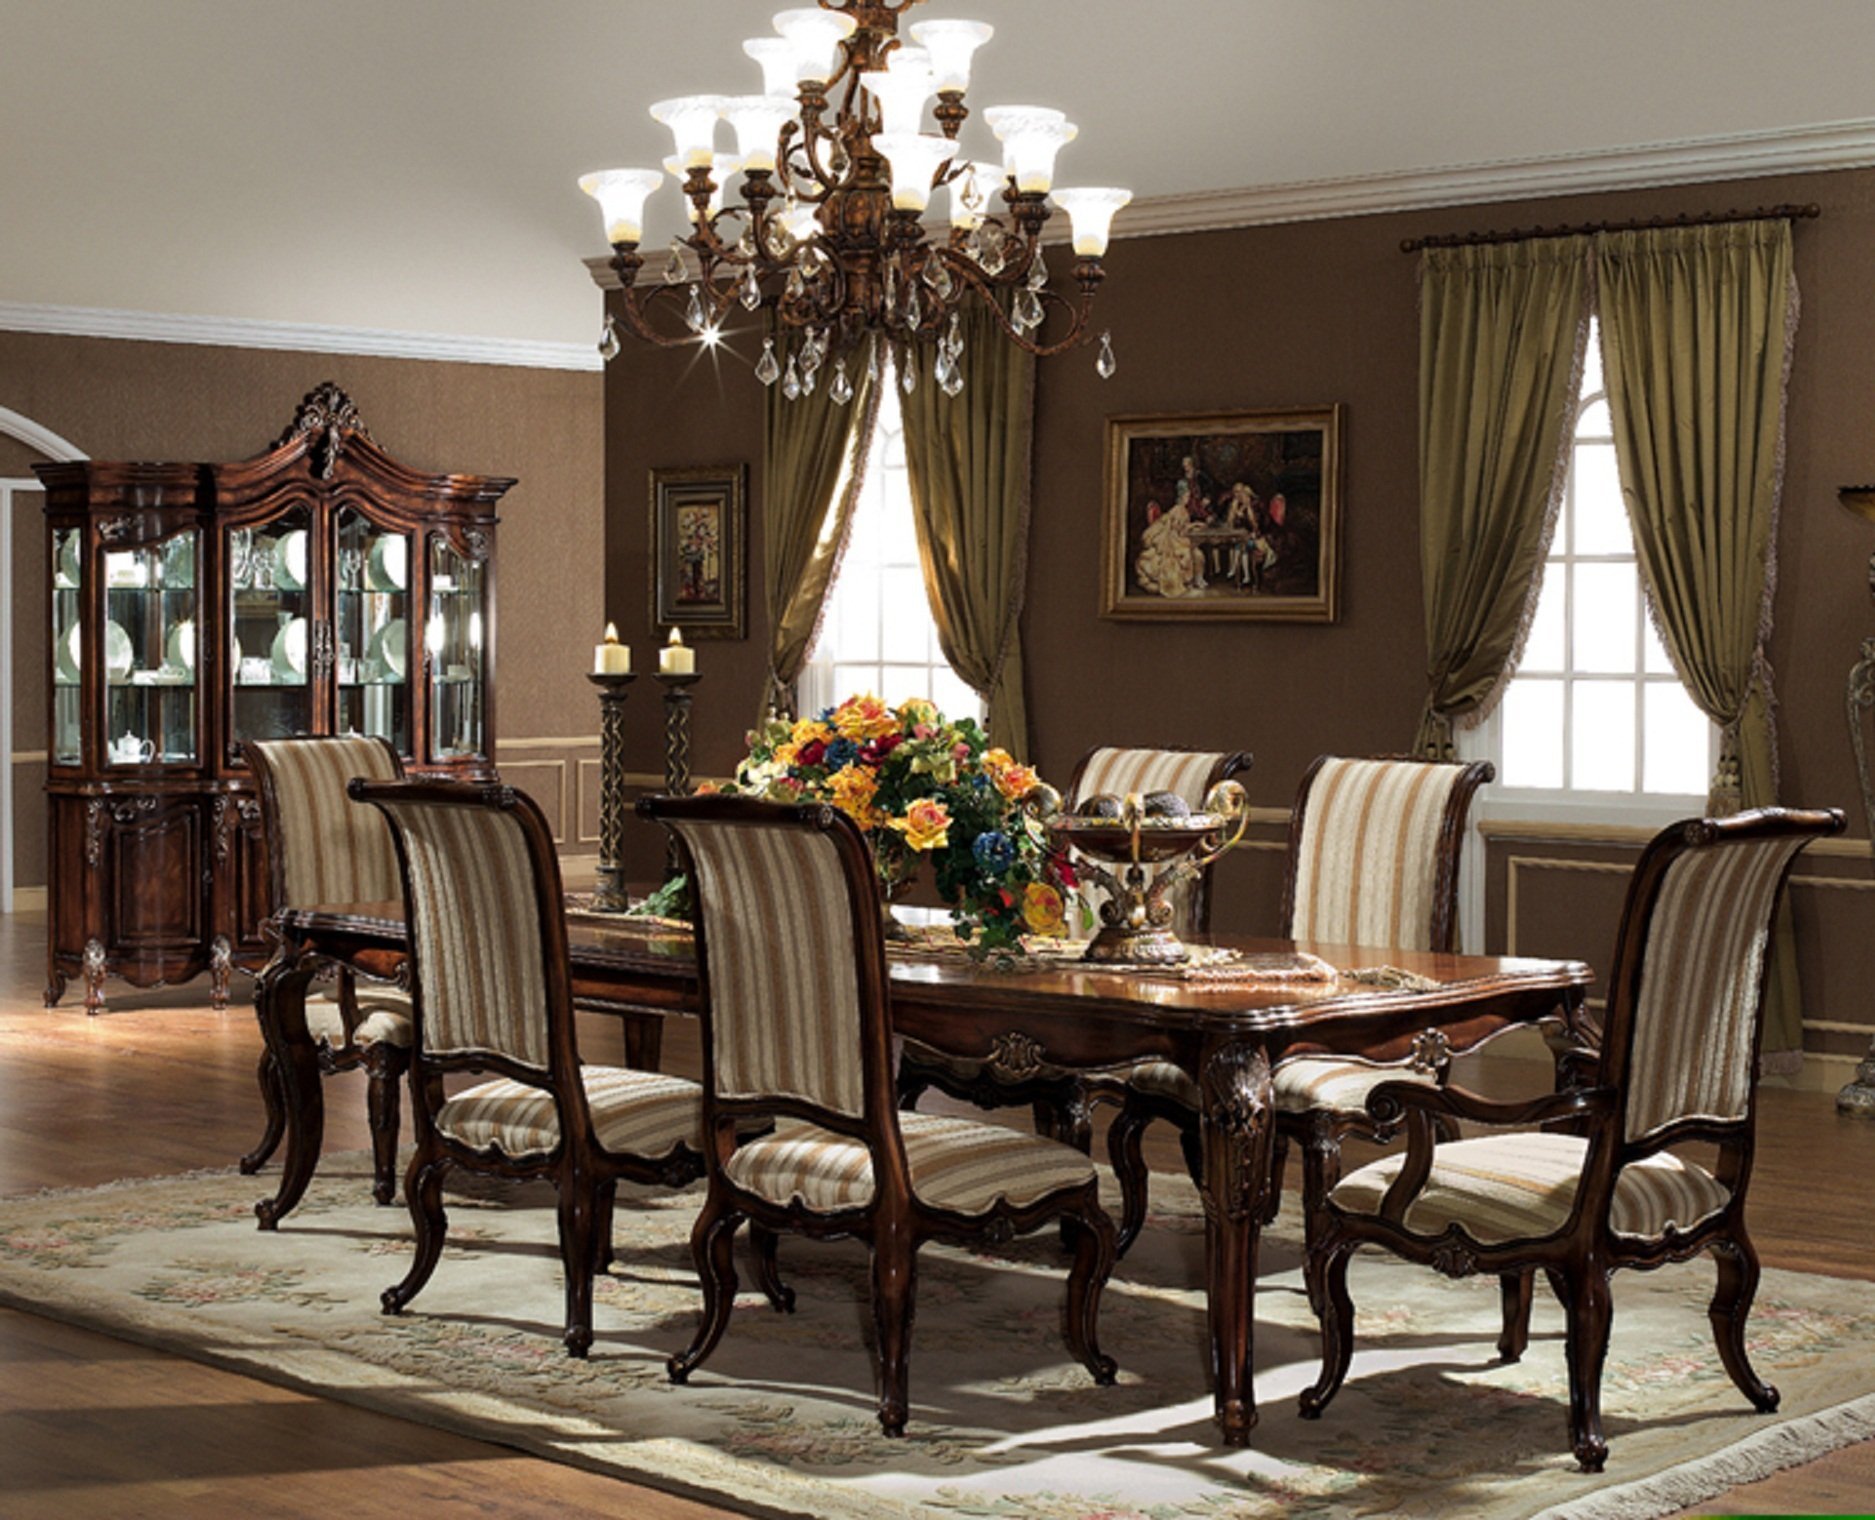 Timelessly Beautiful Country Dining Room Furniture Ideas ...
